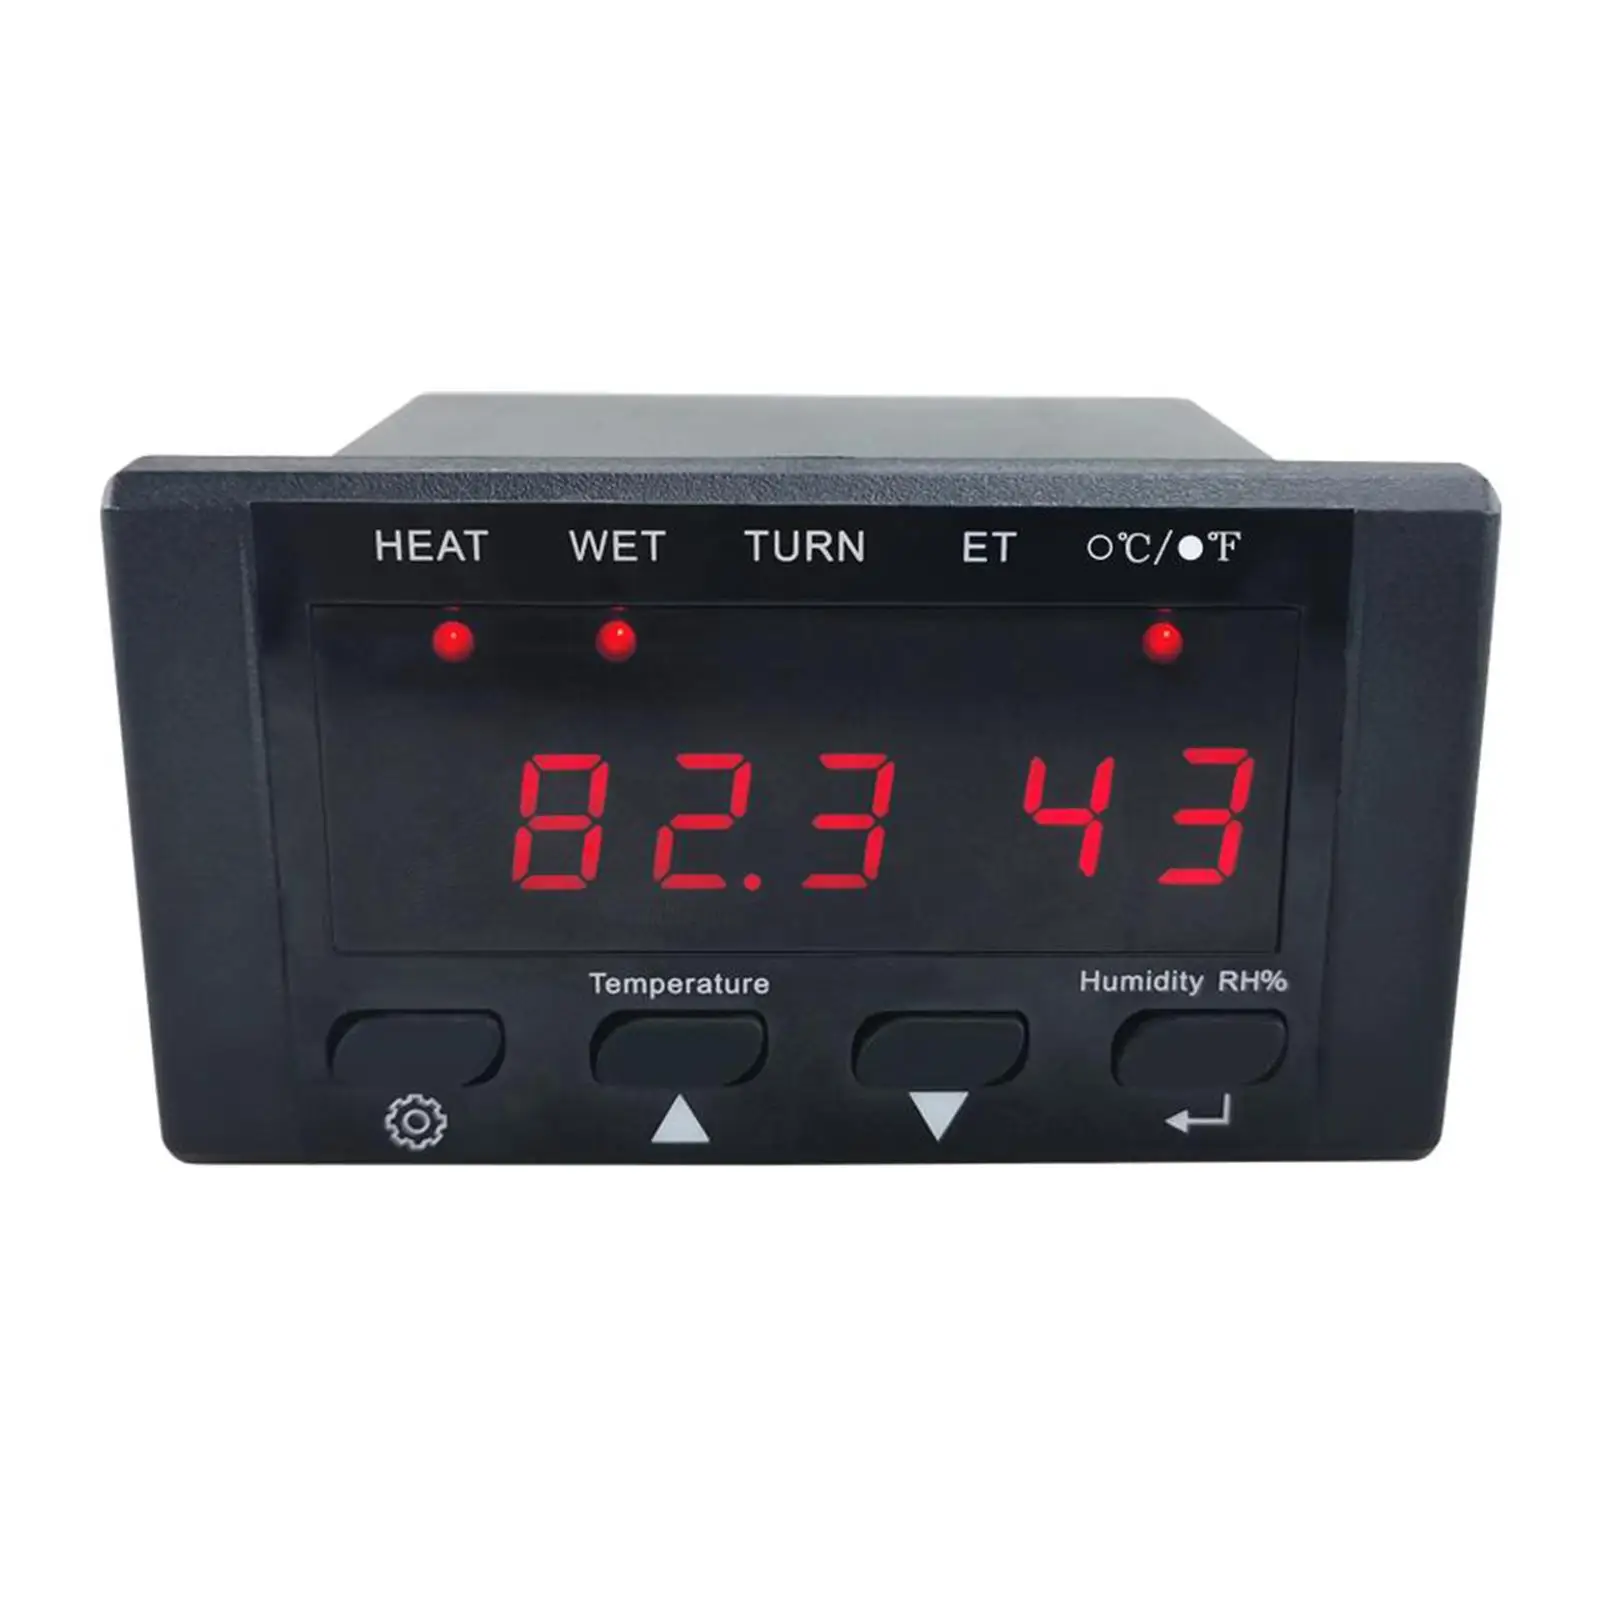 HT-10 Incubator Controller Thermostat Hygrostat with Temperature Humidity Sensor Prob Over Limit Alarm for Egg Hatching Duck Egg